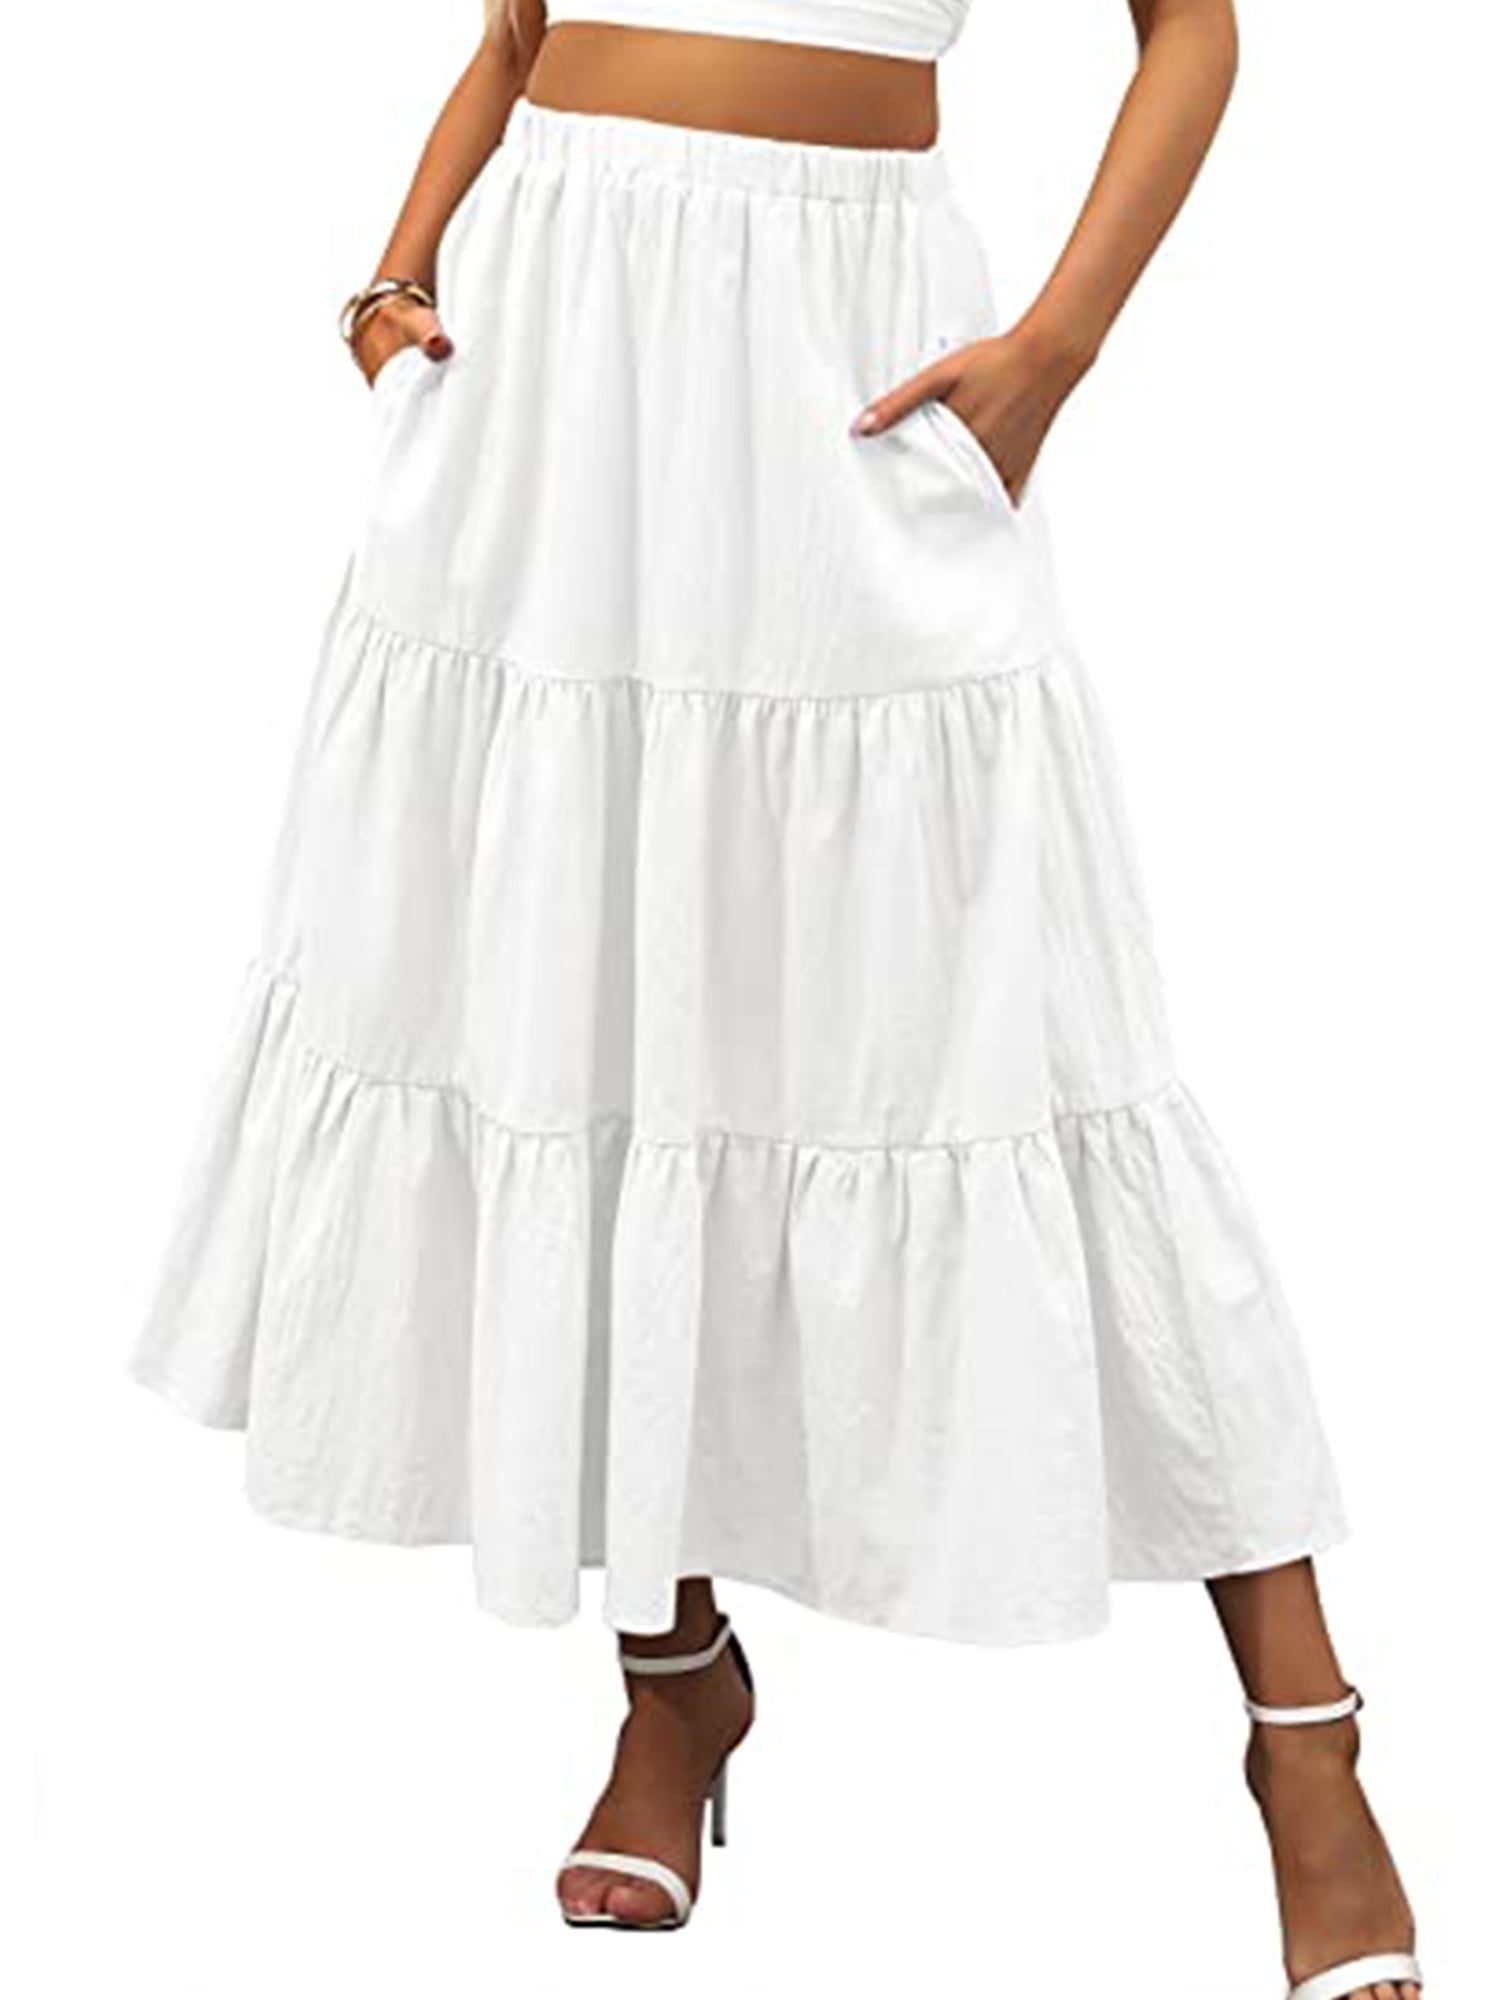 Beebay White Tiered Ruffle Skirt  Infant  Girls  Best Price and Reviews   Zulily